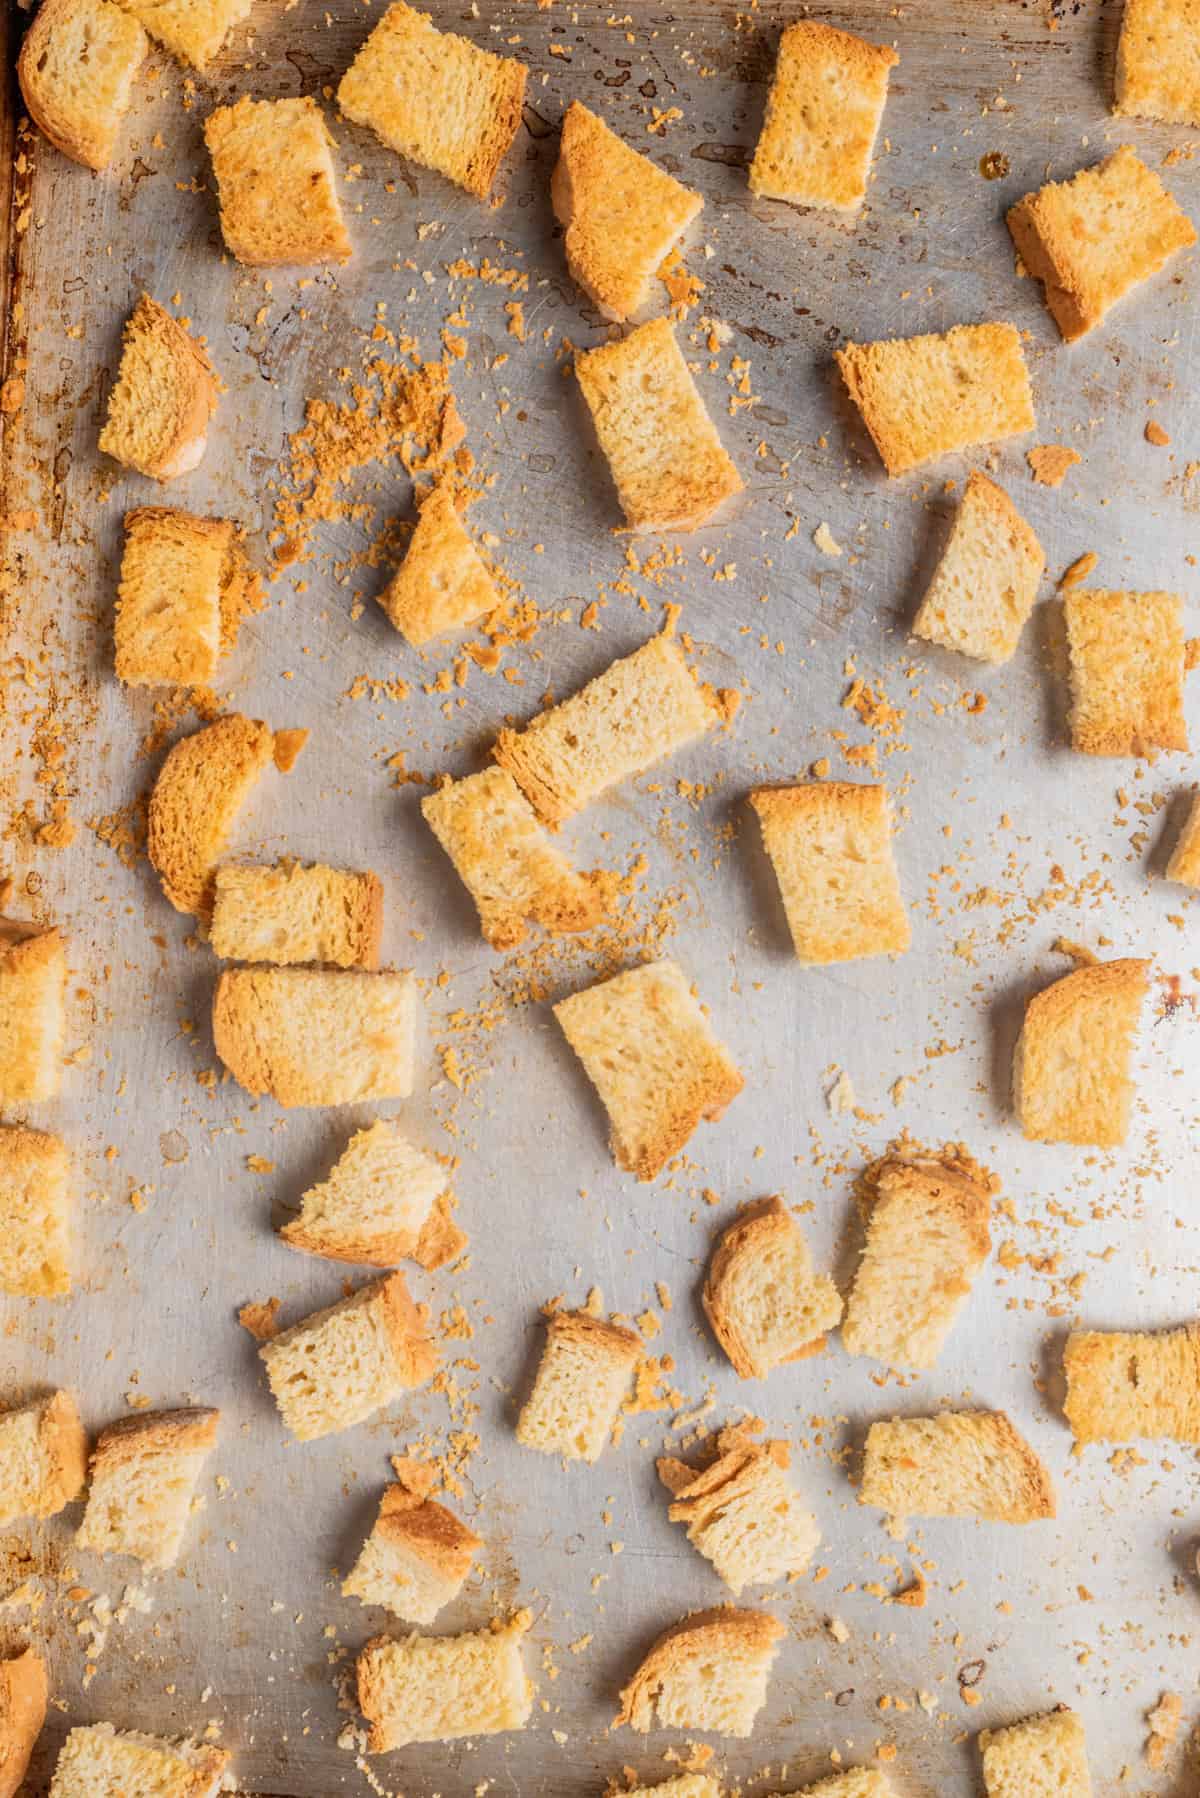 An overhead image of golden brown cubed crusty bread spread out on a baking sheet.